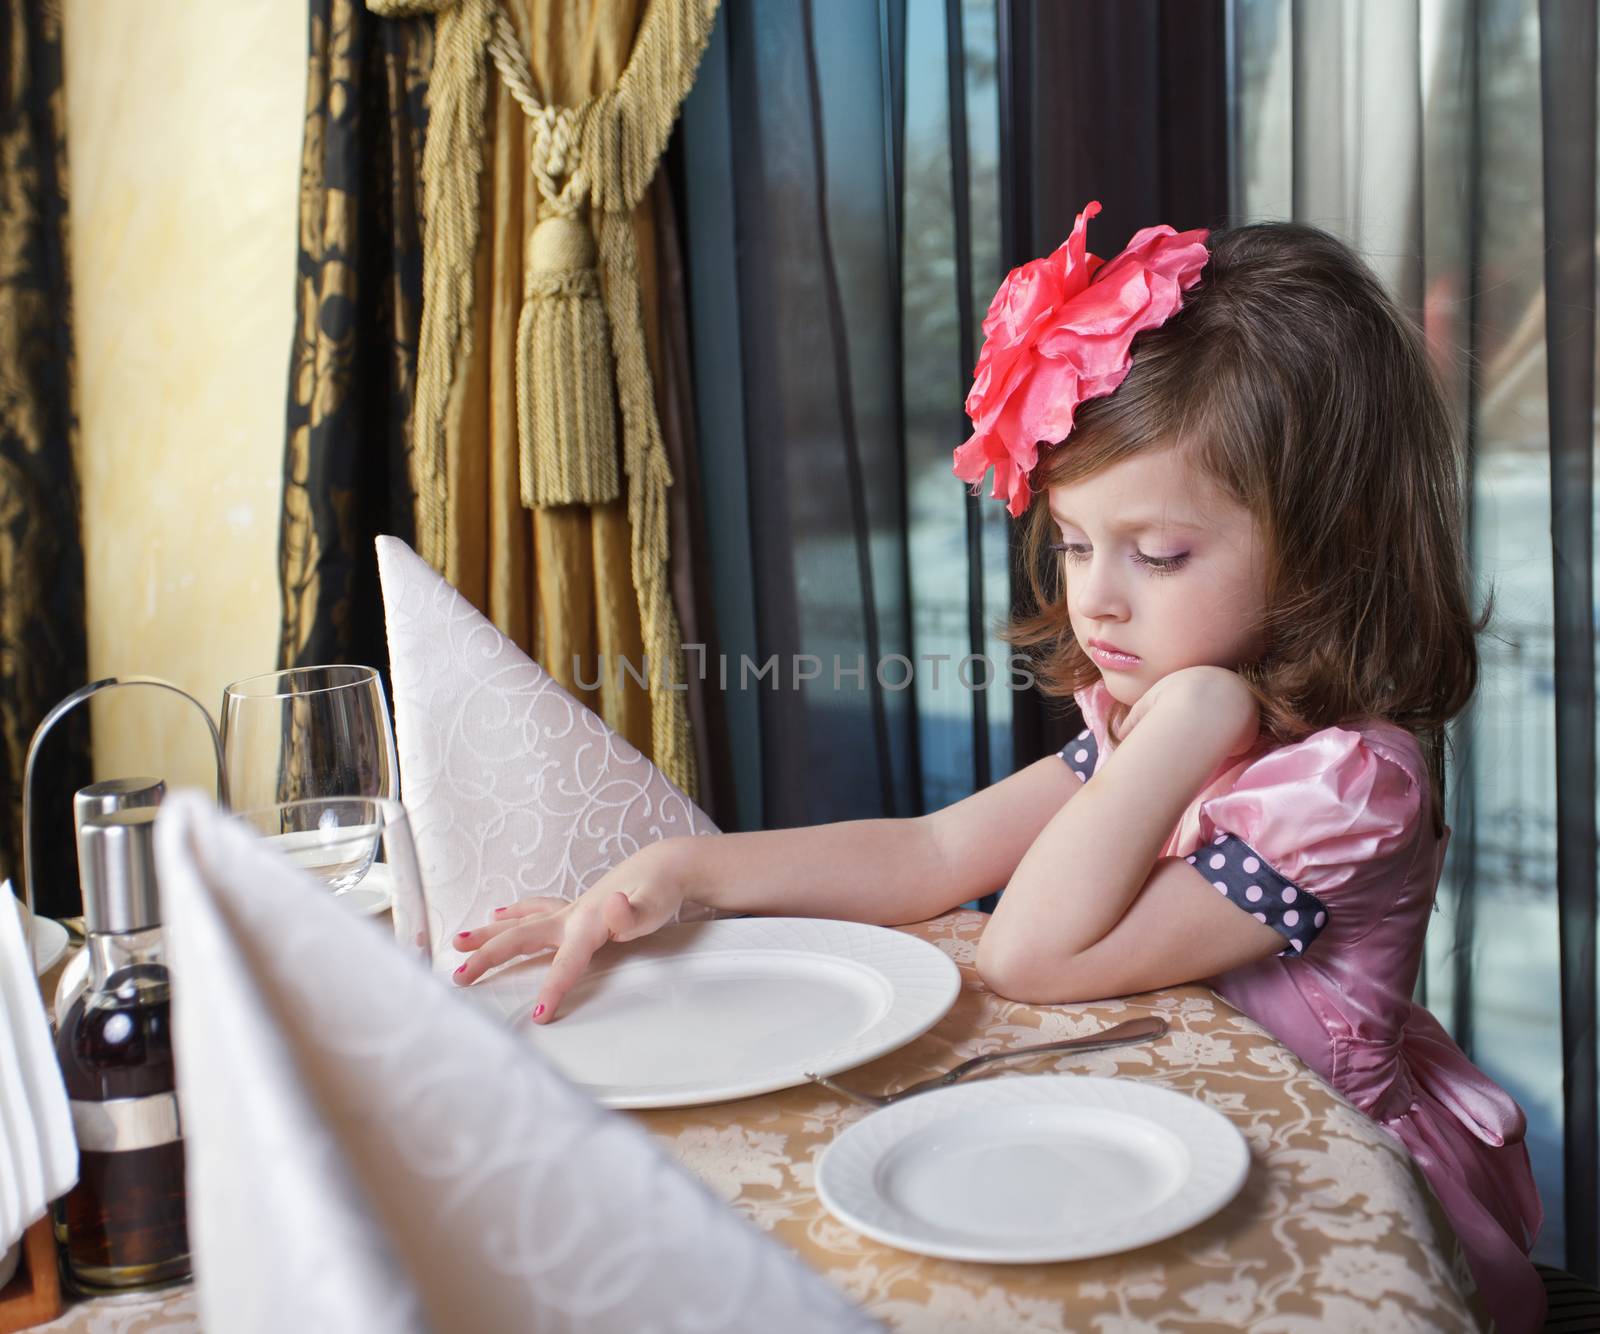 A girl in a pink dress, sad at the table waiting for food